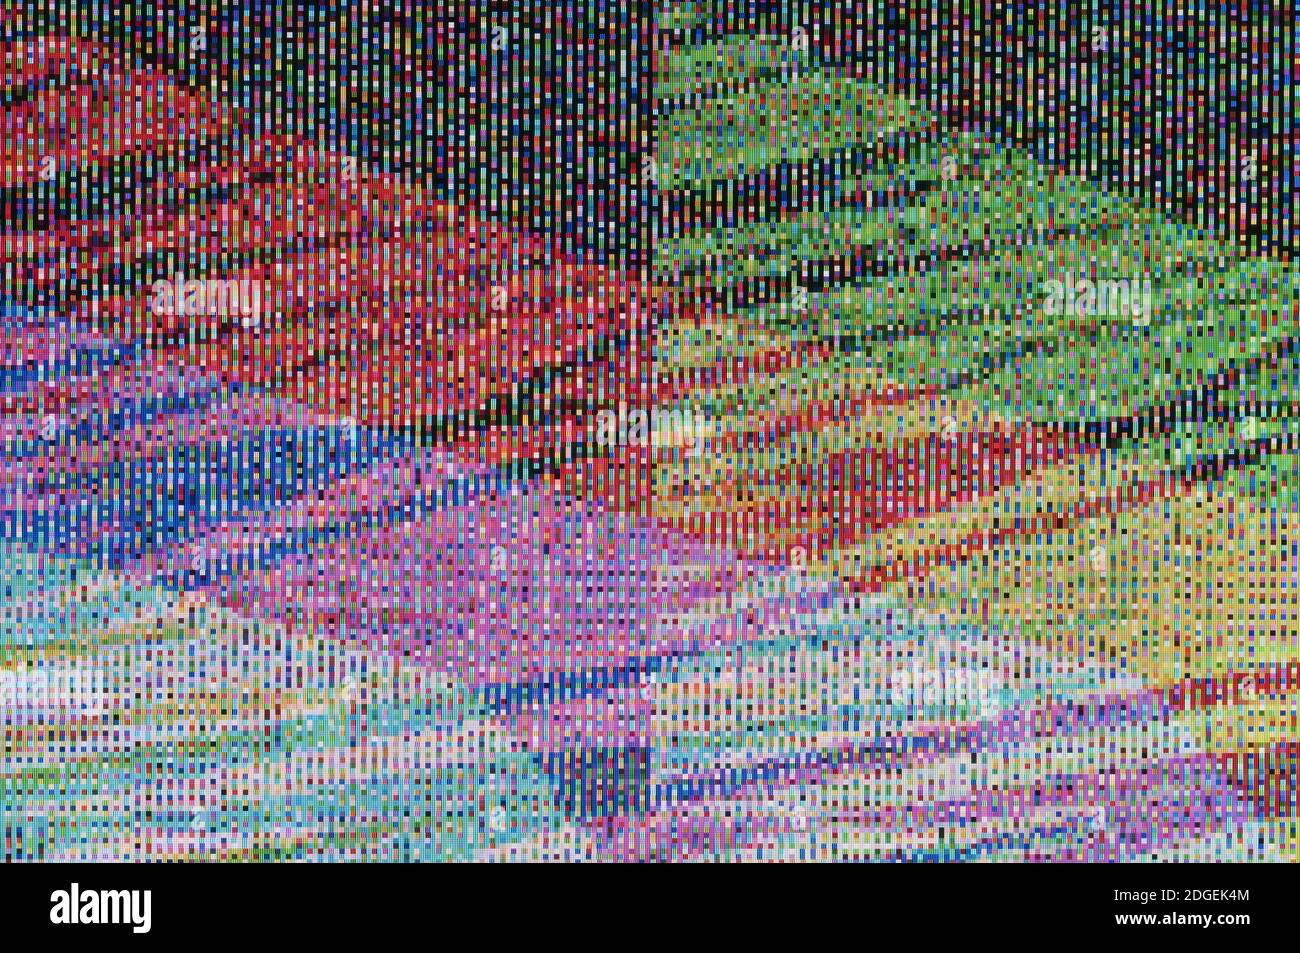 Abstract background, pattern of a digital glitch Stock Photo